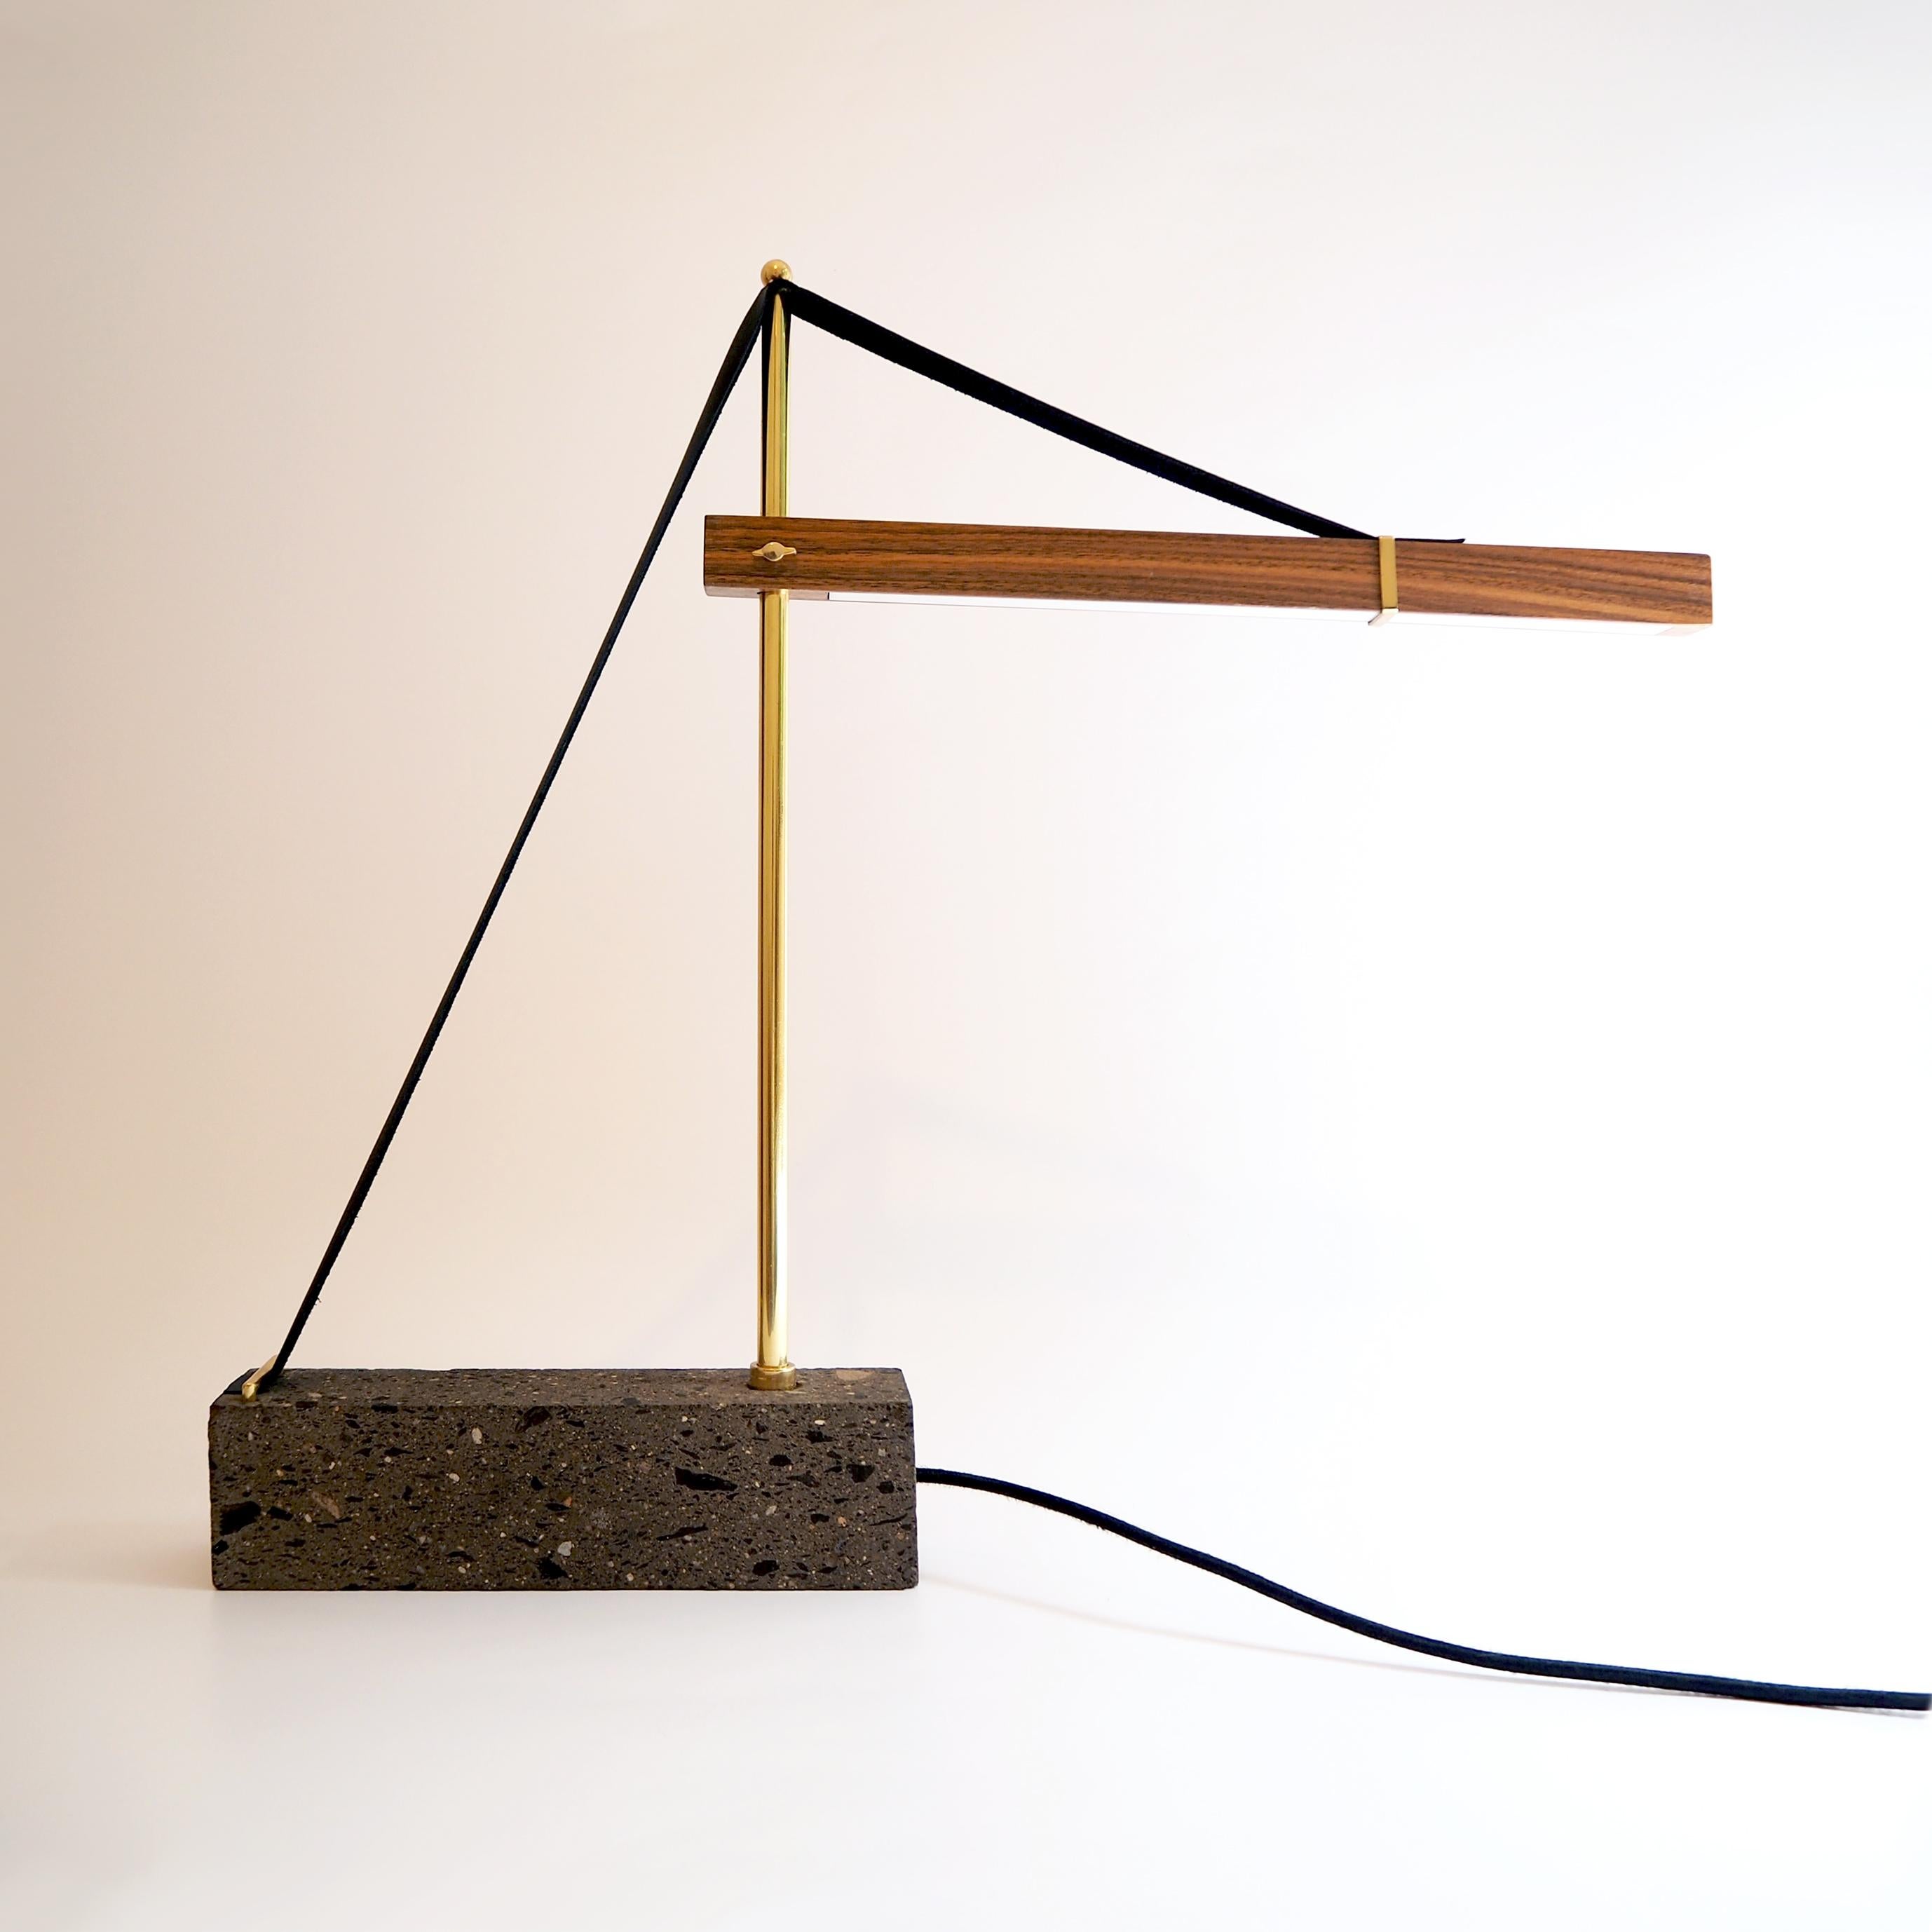 Grua lamp by Nomade Atelier
Dimensions: D15 x W 62 x H 50 cm
Material: Brass, walnut, stone, leather, LED Lighting
Weight: 10 kg

All our lamps can be wired according to each country. If sold to the USA it will be wired for the USA for